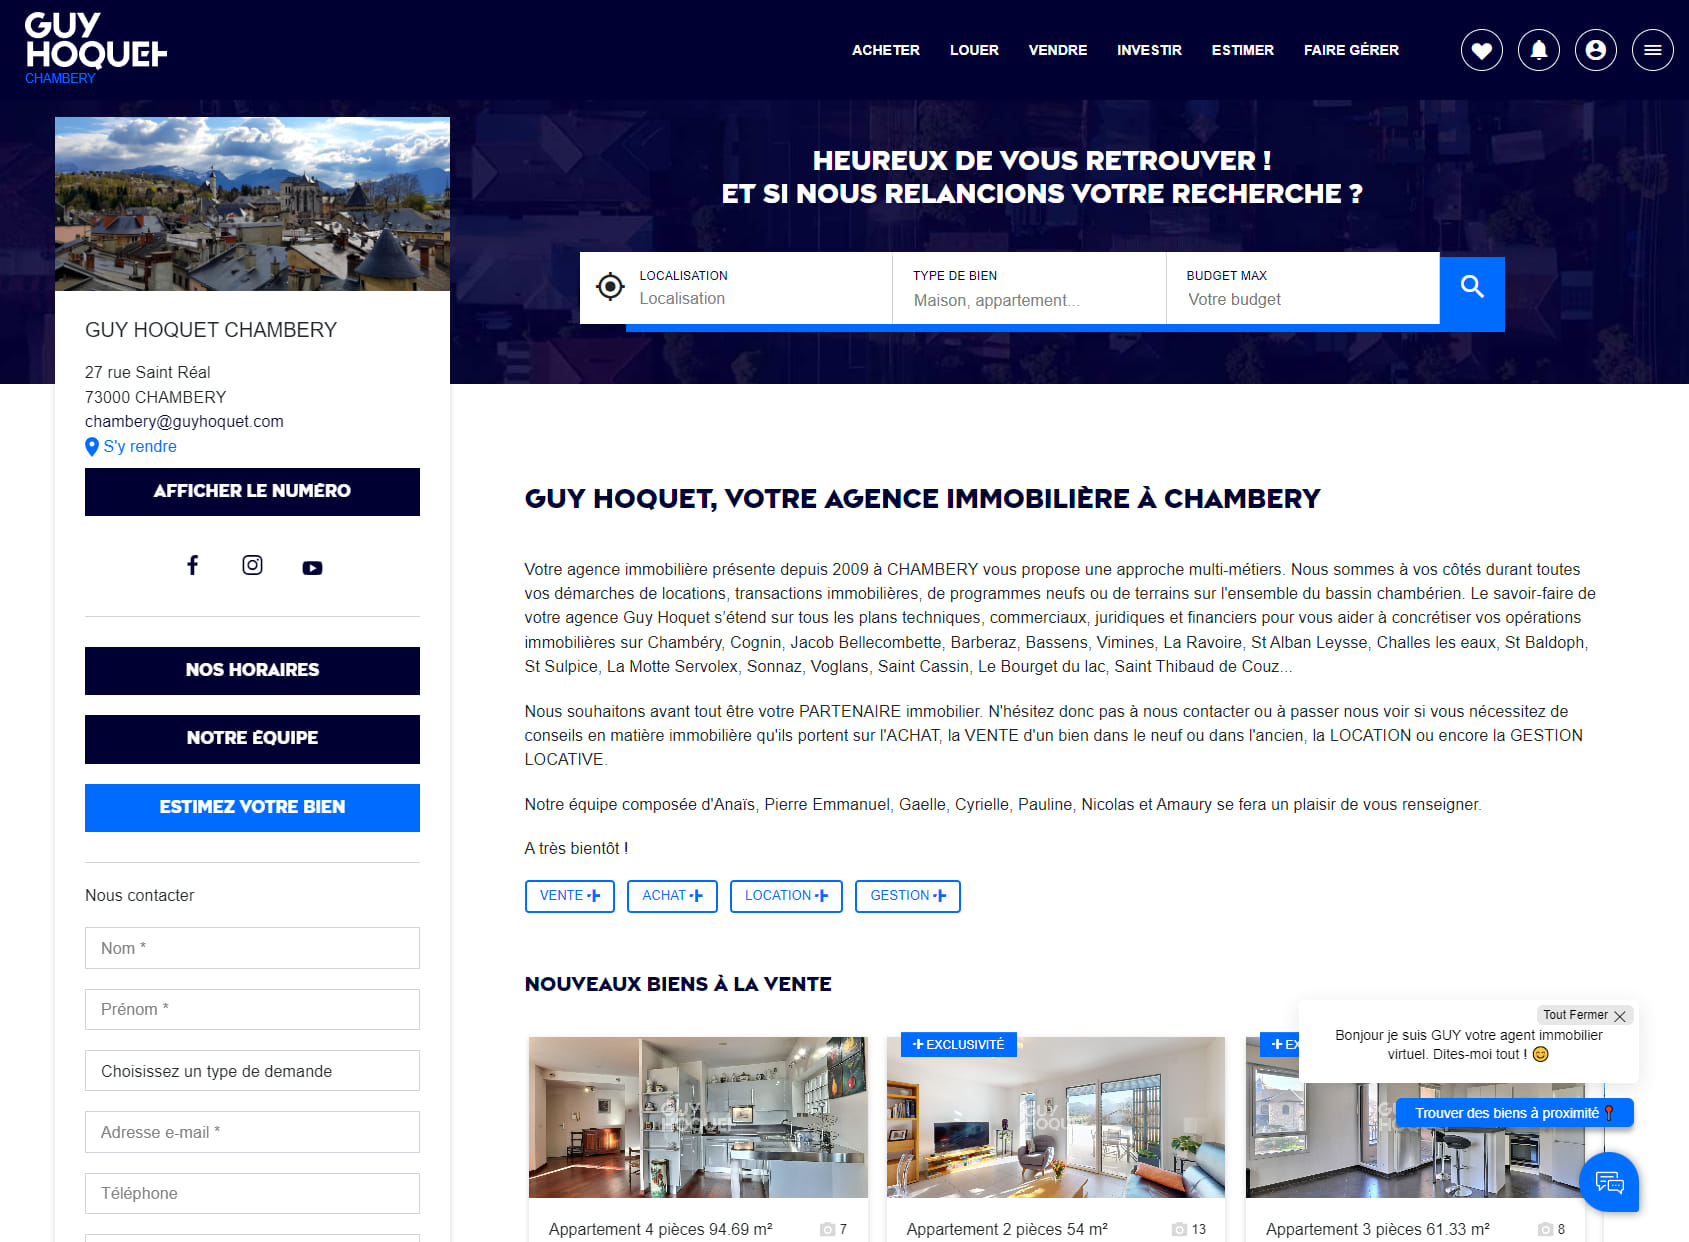 Agence immobilière Guy Hoquet CHAMBERY